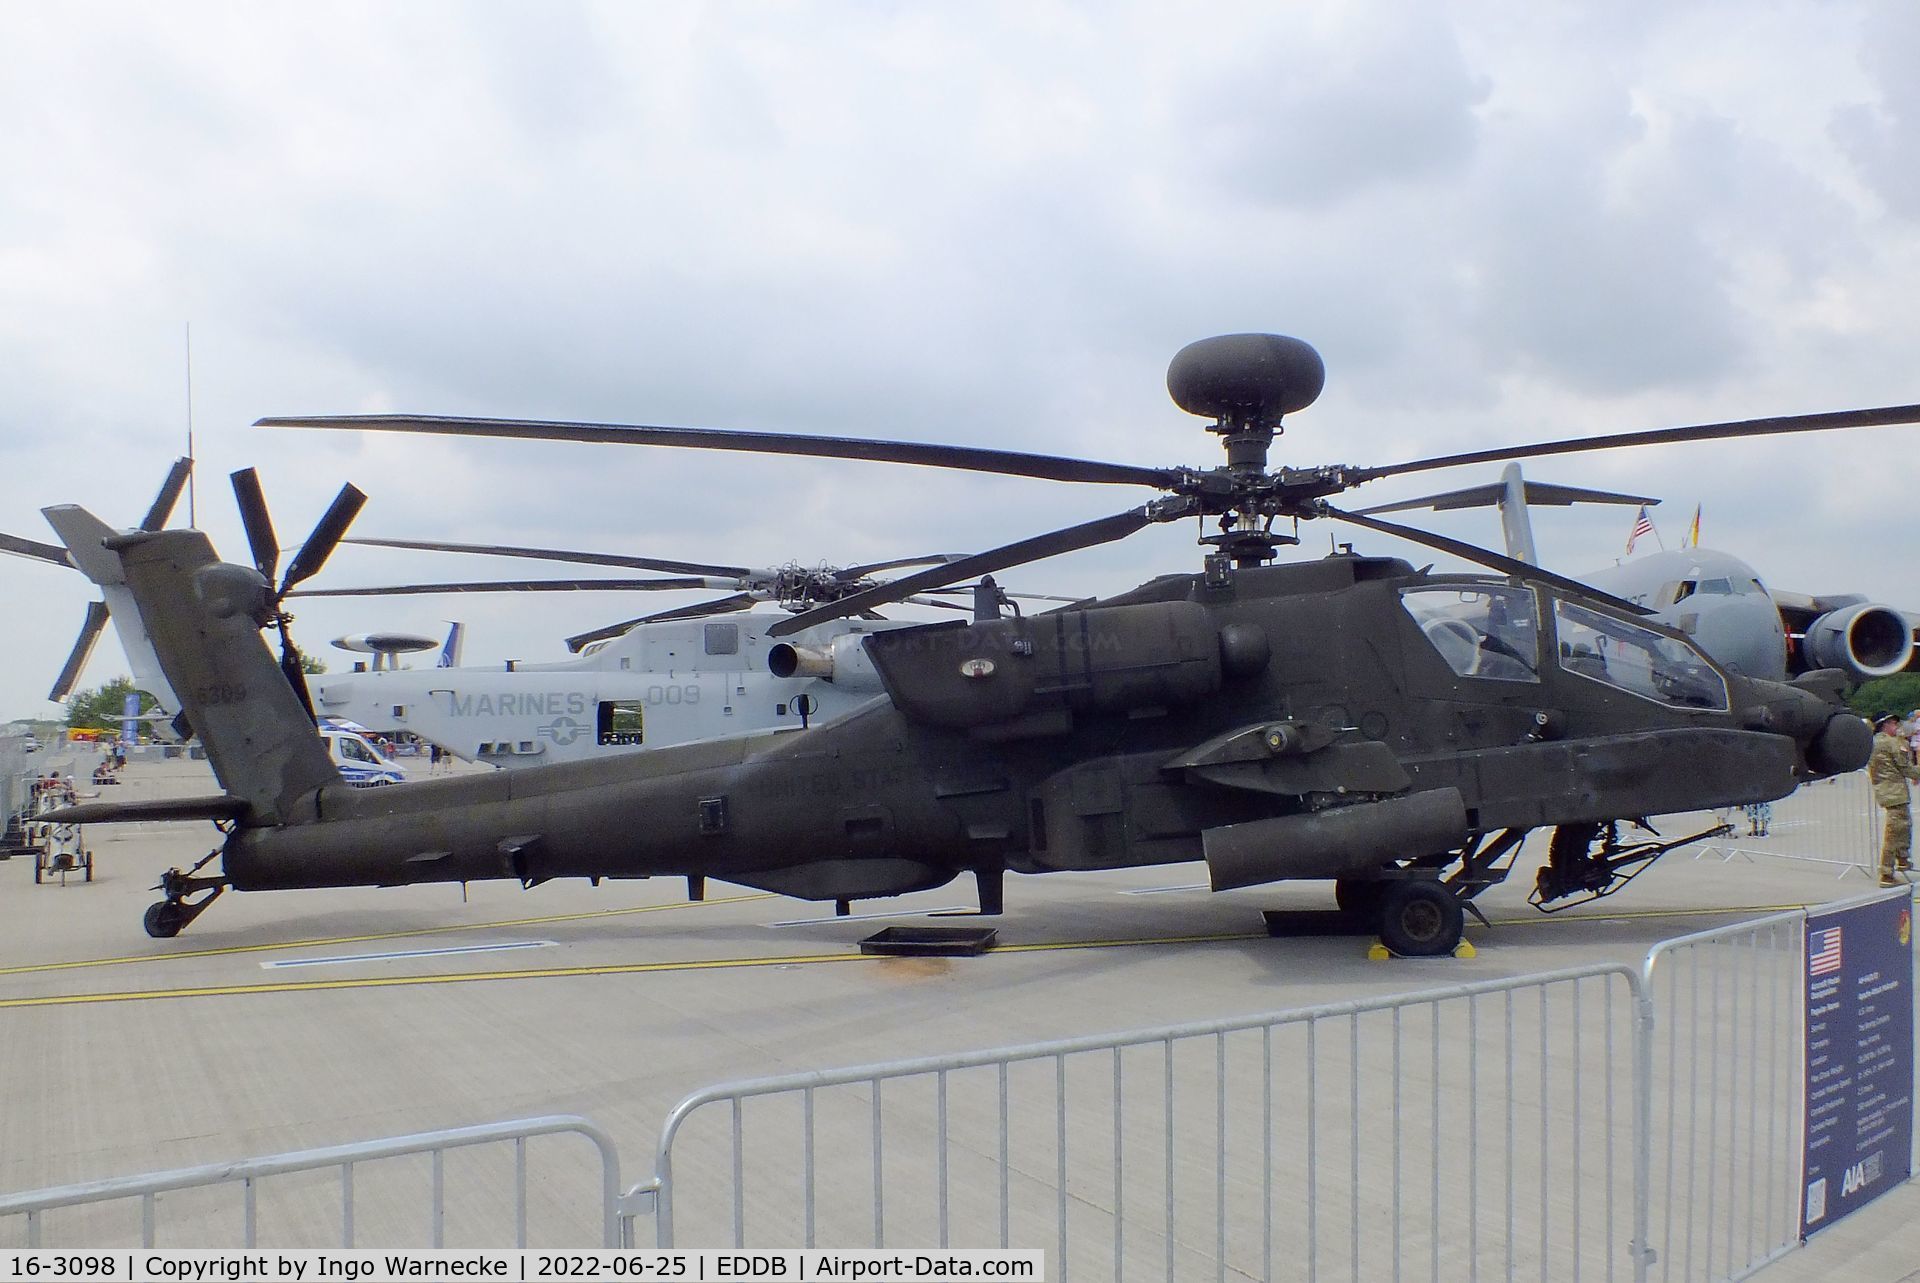 16-3098, 2016 Boeing AH-64E C/N NM098, Boeing AH-64E Apache Guardian of the US Army at ILA 2022, Berlin